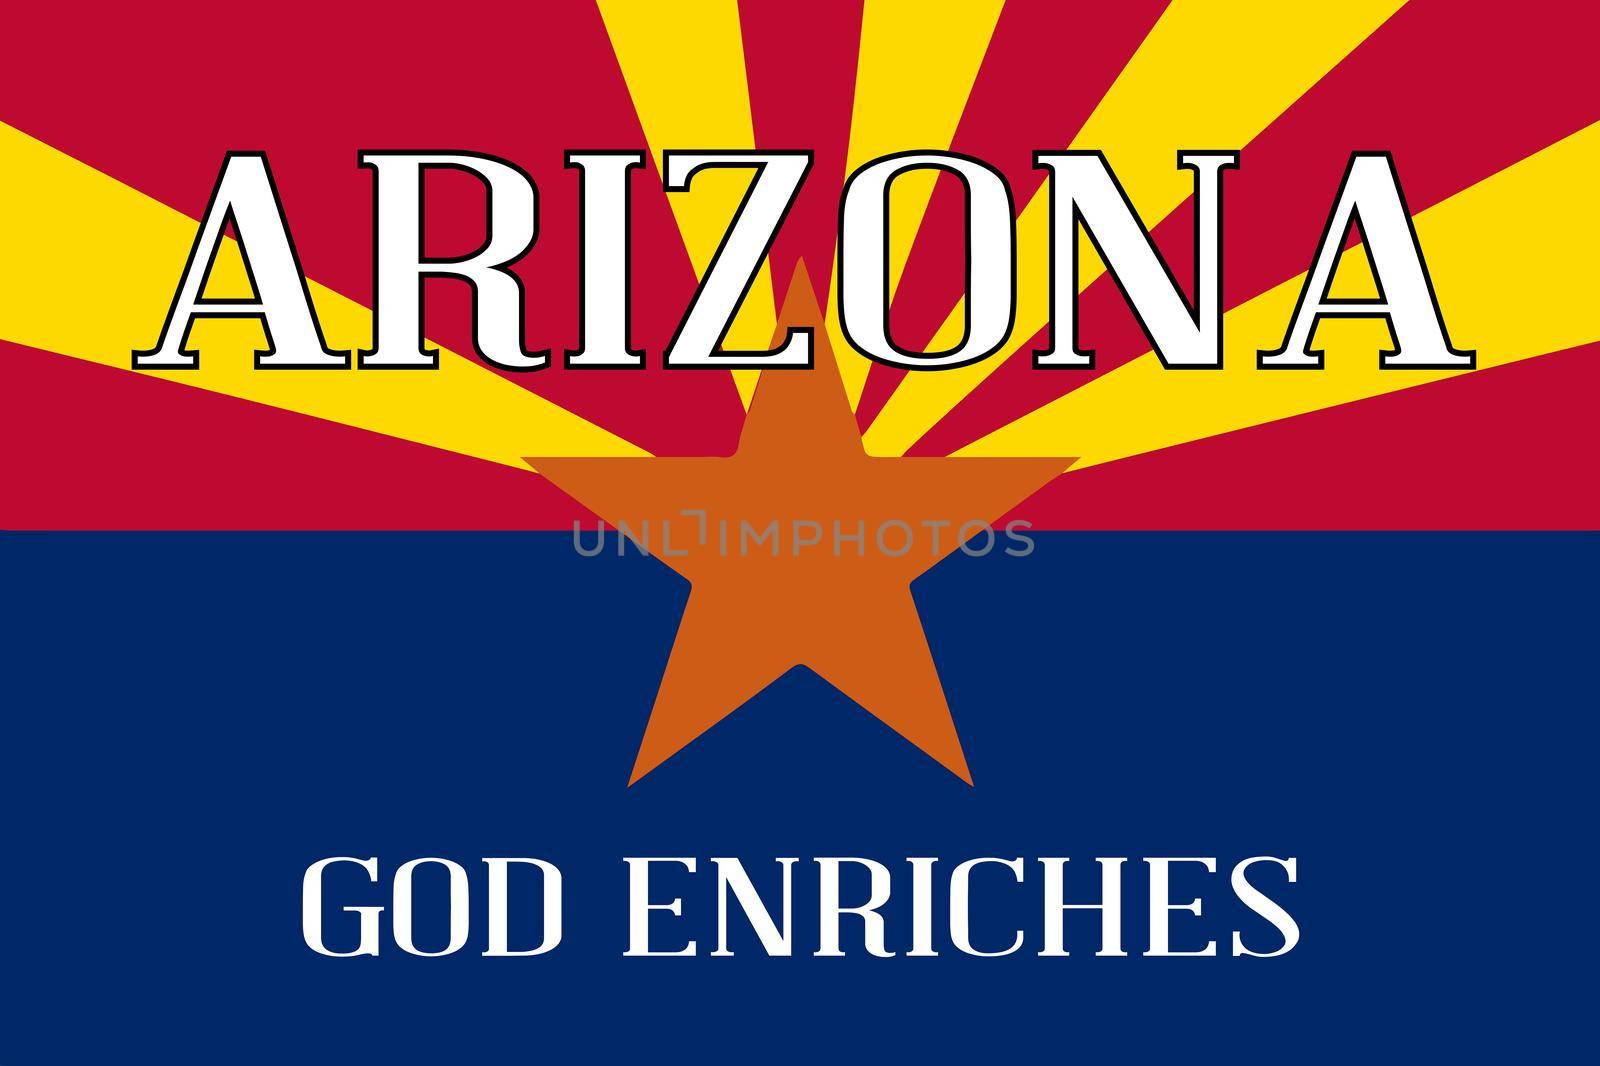 The state flag of the State of Arizona with motto